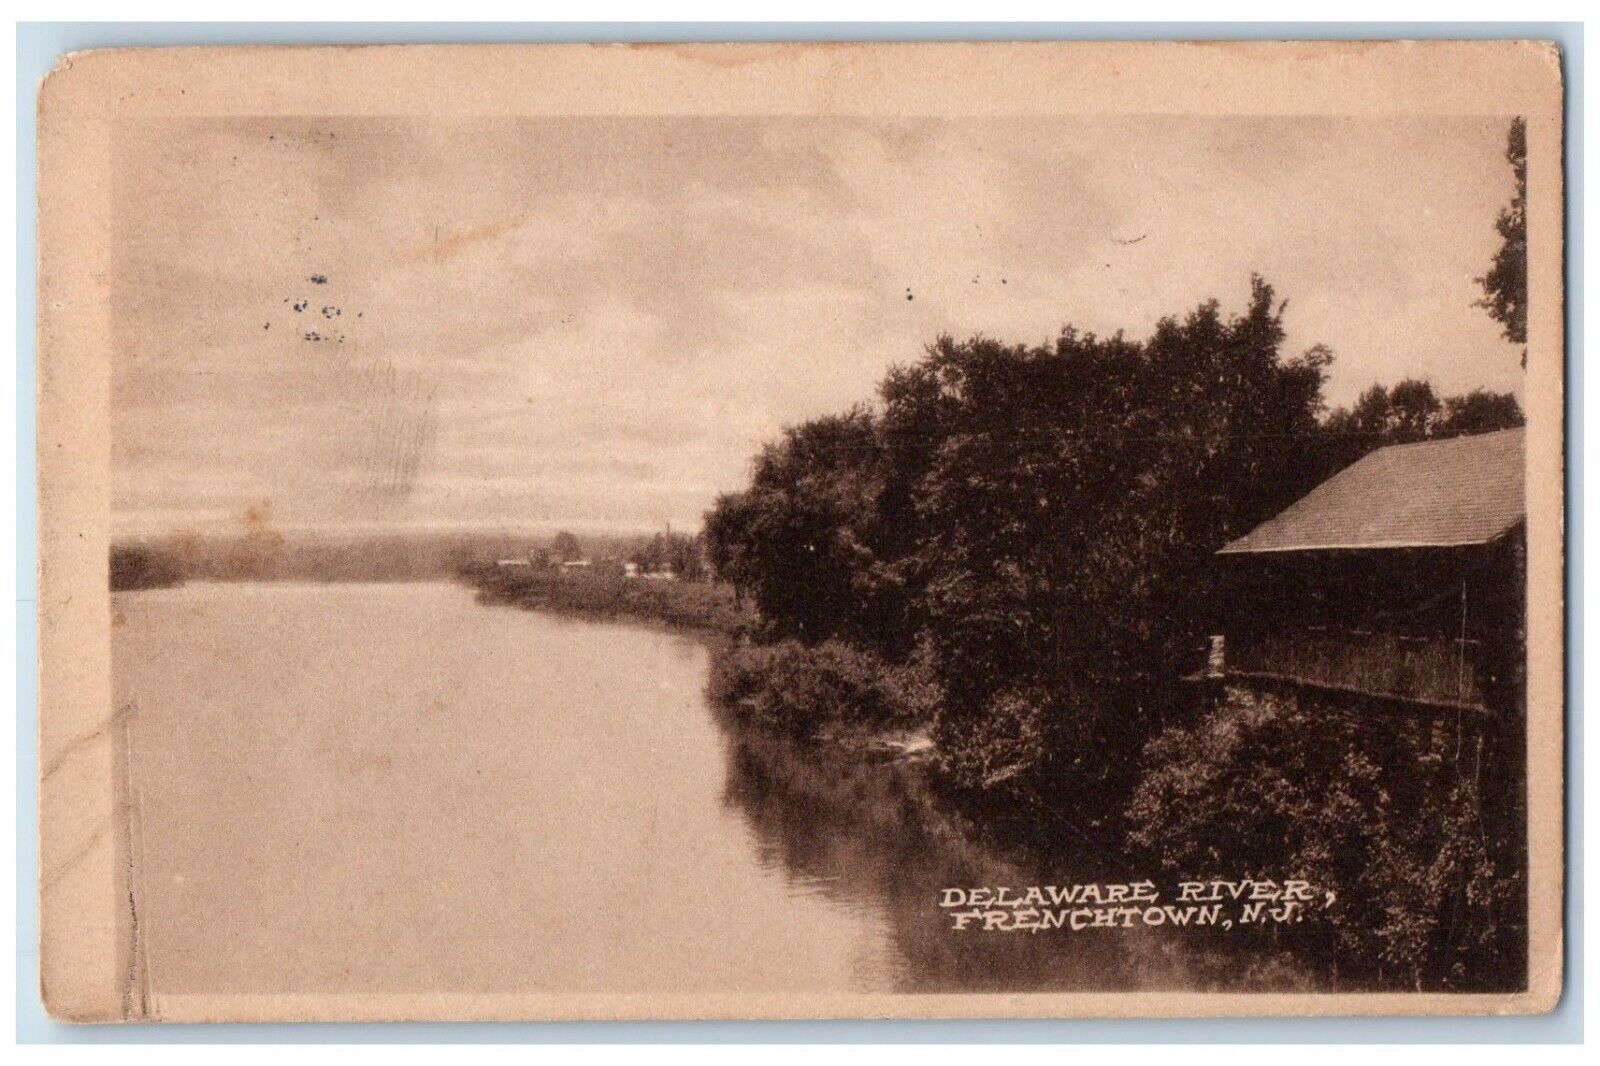 1924 View Of Delaware River Frenchtown New Jersey NJ Posted Vintage Postcard